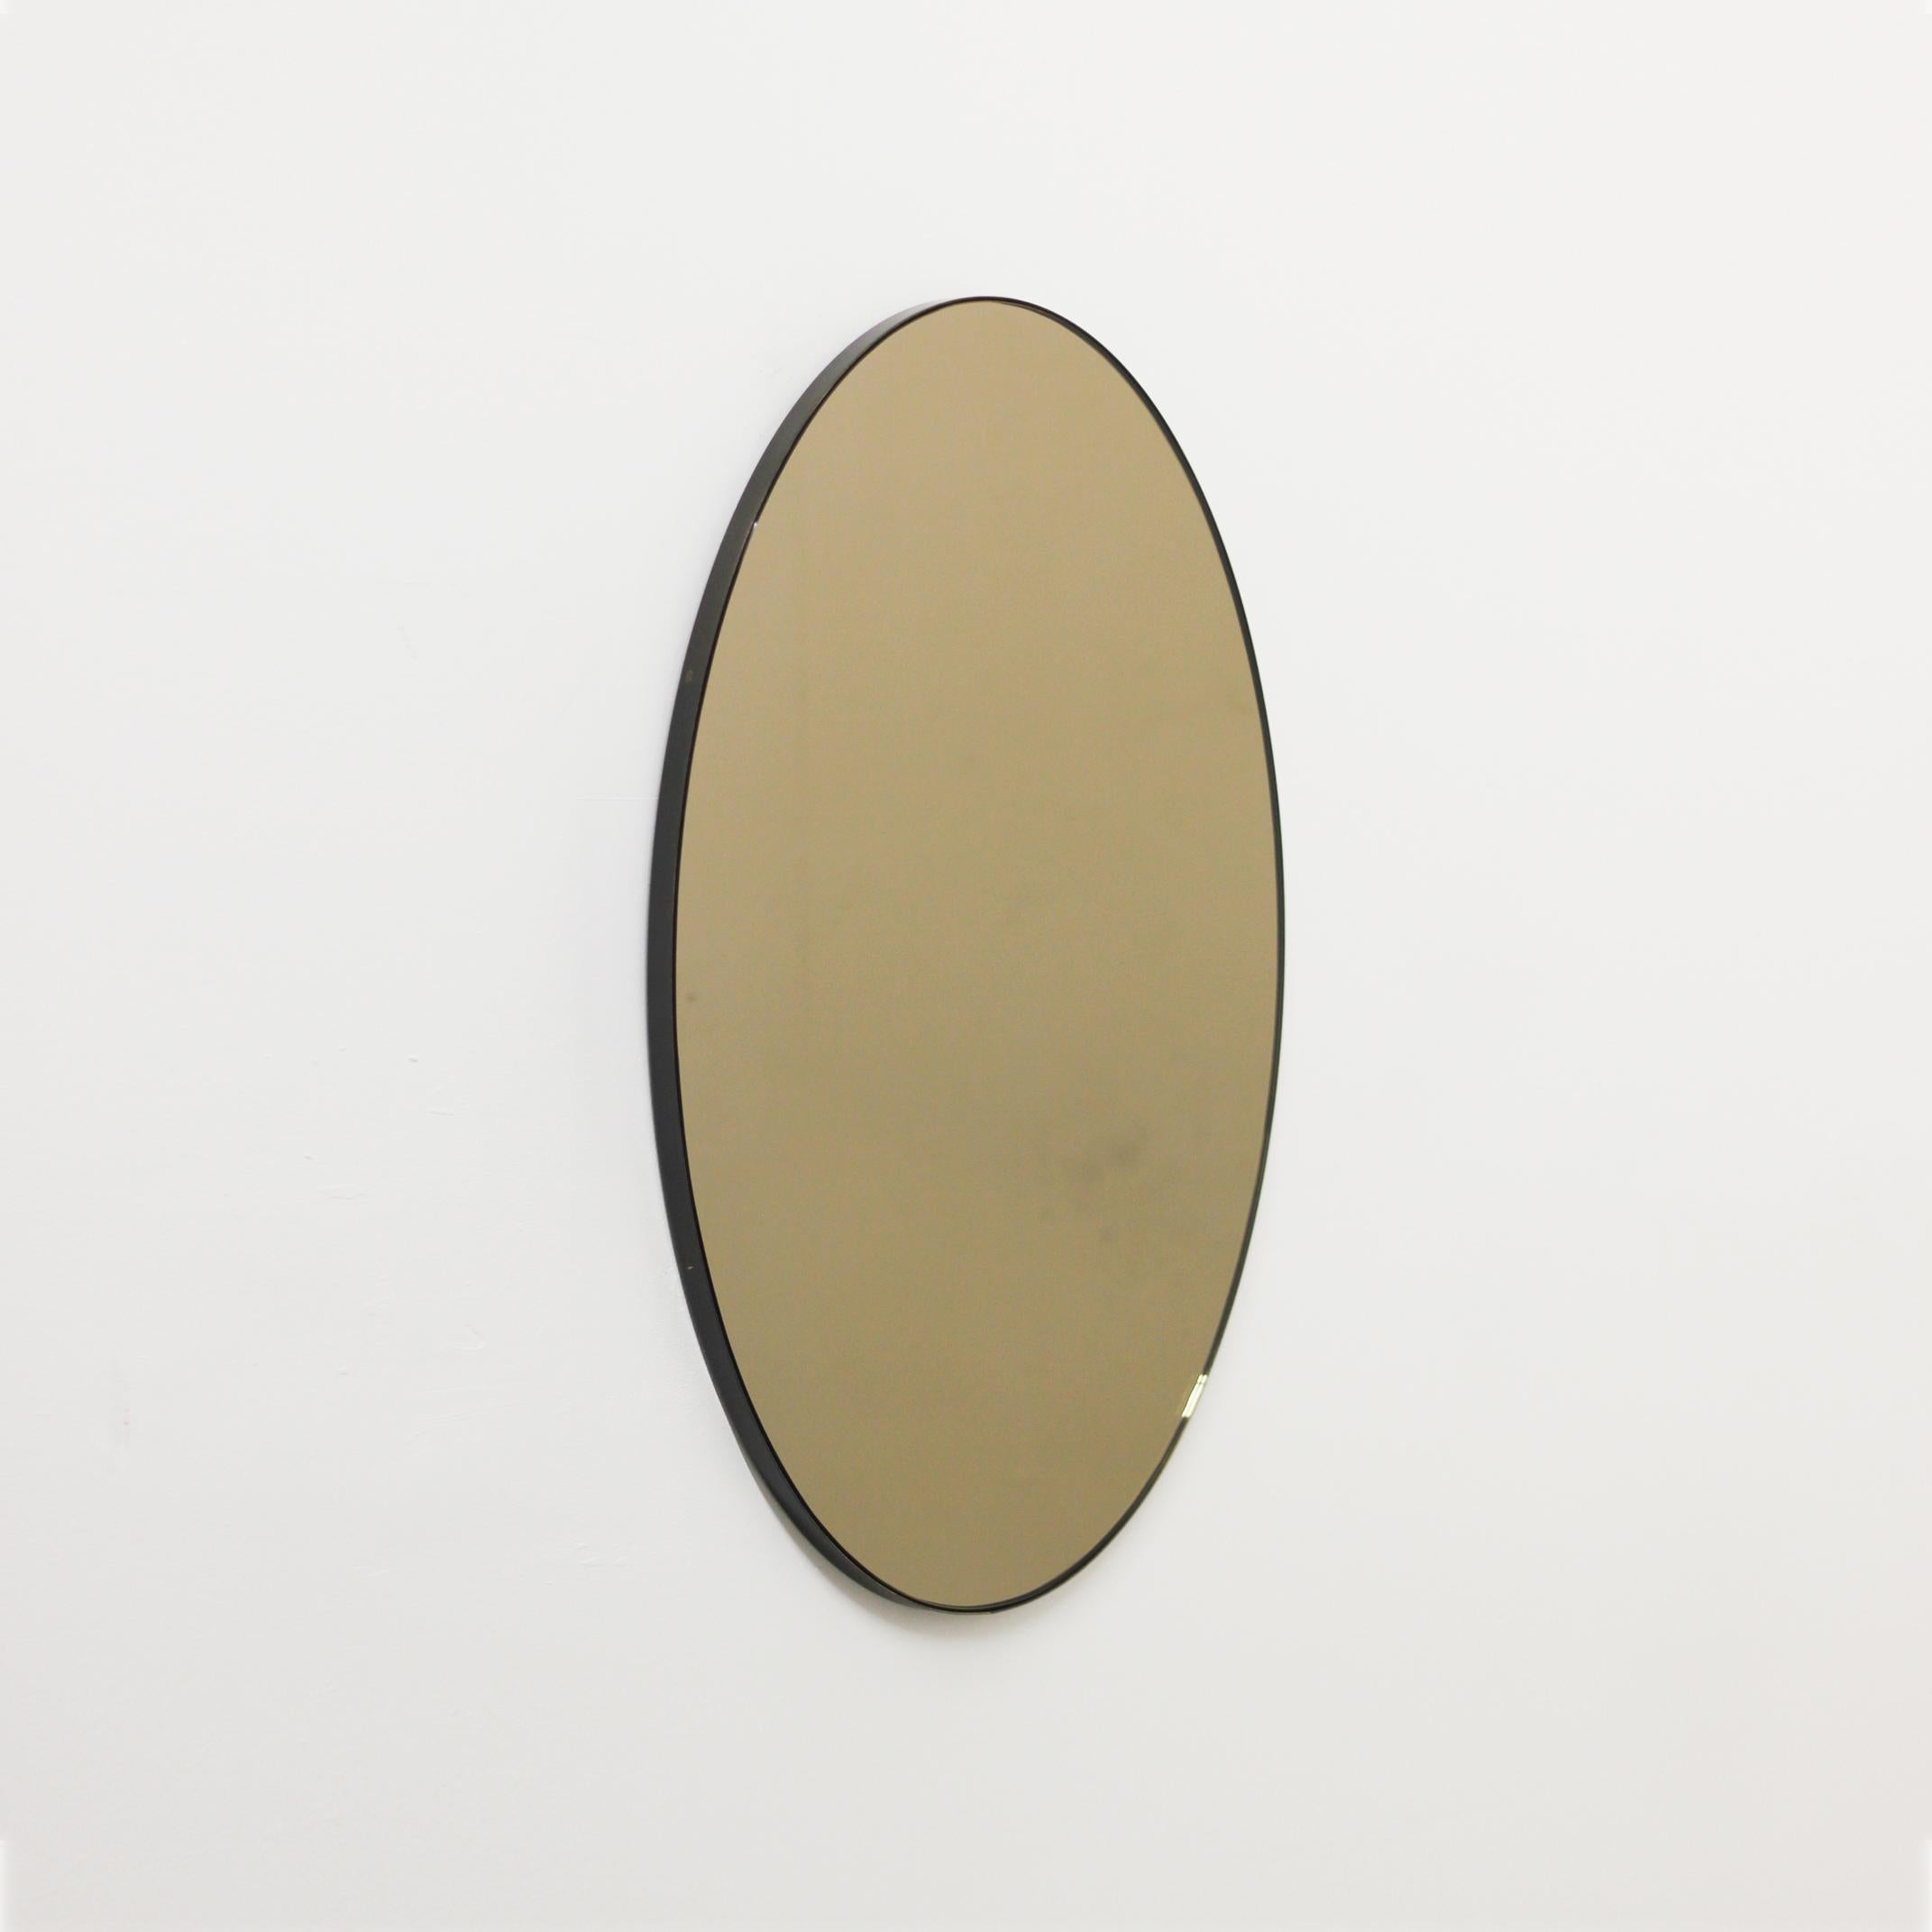 Contemporary oval bronze tinted mirror with an elegant bronze patina solid brass frame. Designed and handcrafted in London, UK.

Our mirrors are designed with an integrated French cleat (split batten) system that ensures the mirror is securely